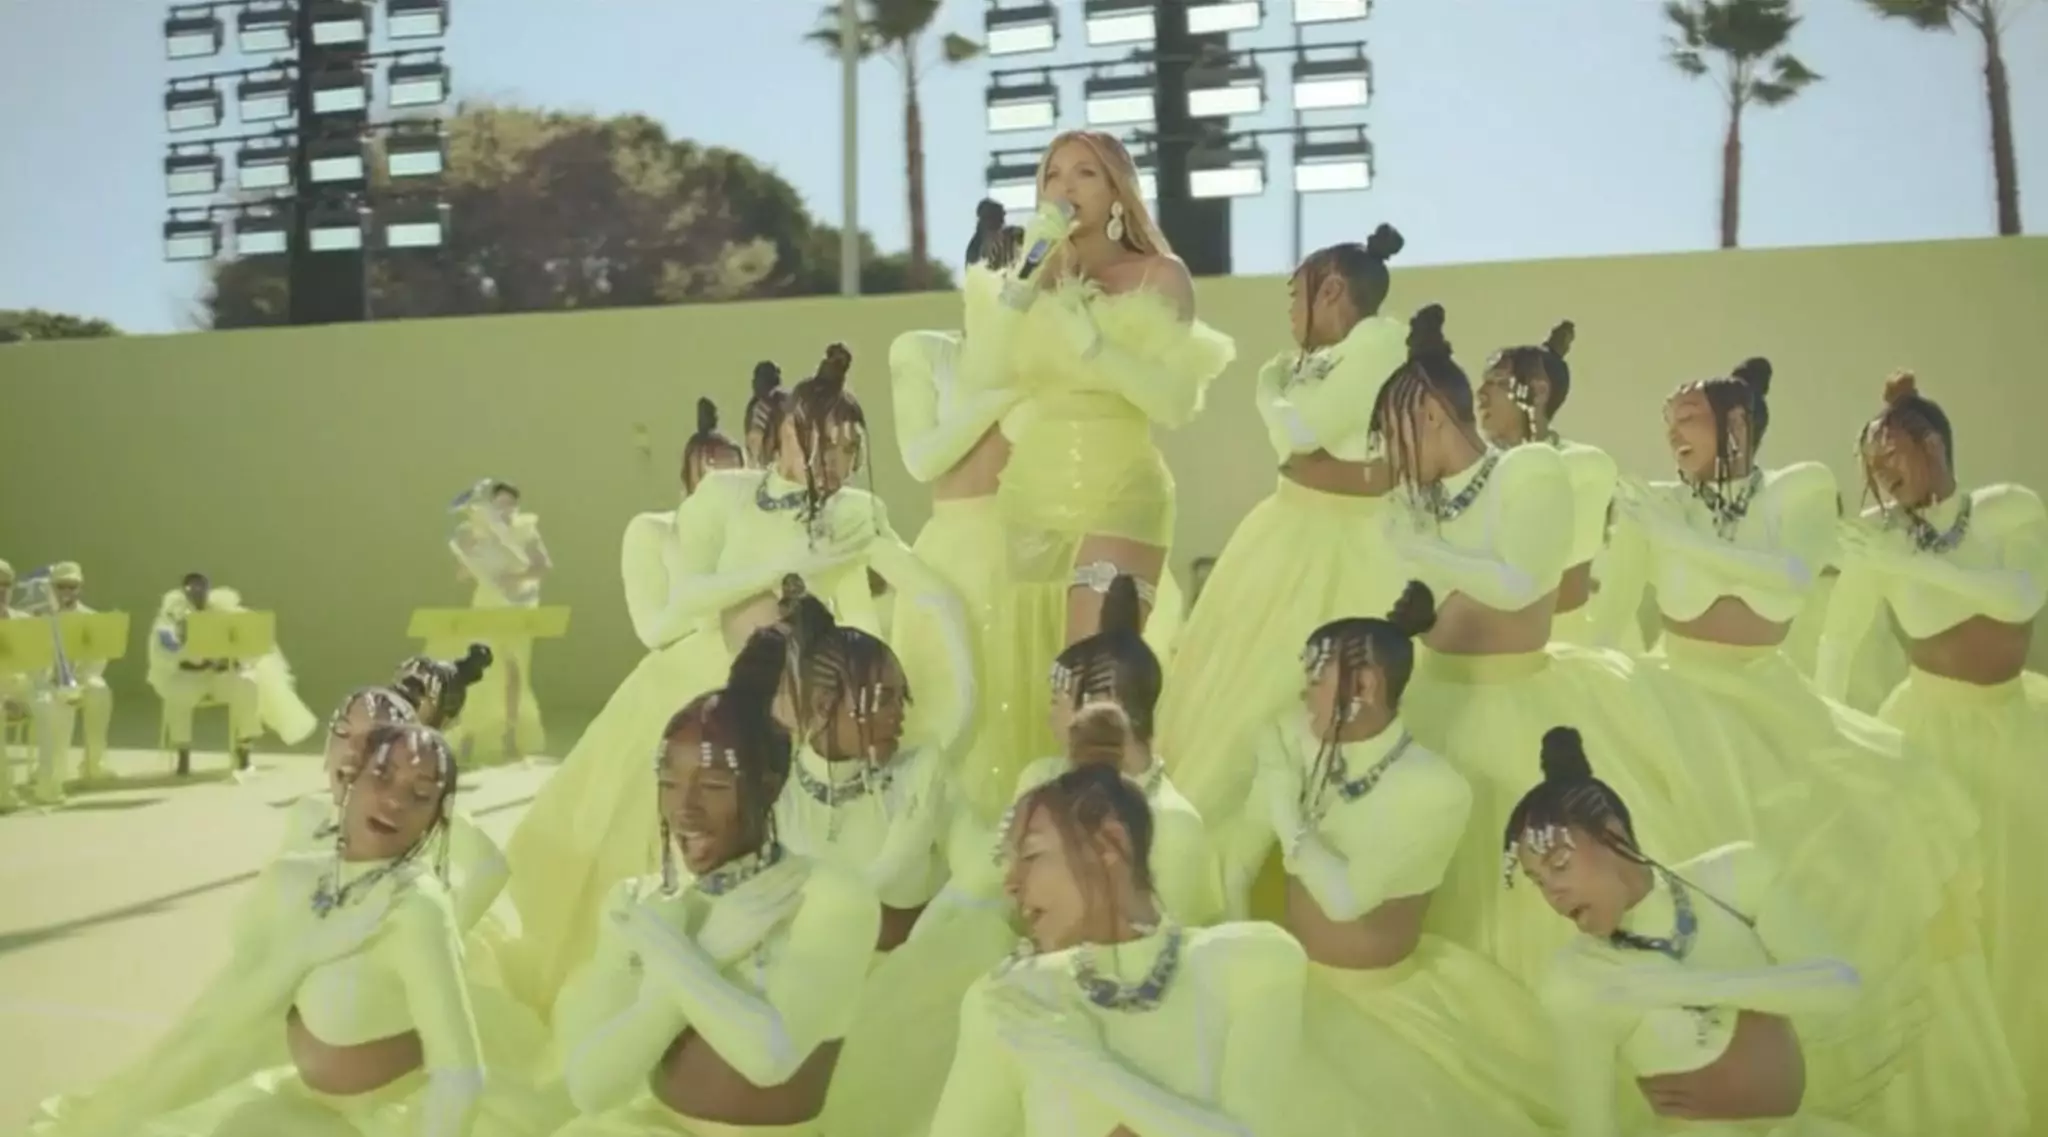 Beyoncé and her dancers were dressed in the same colour. (